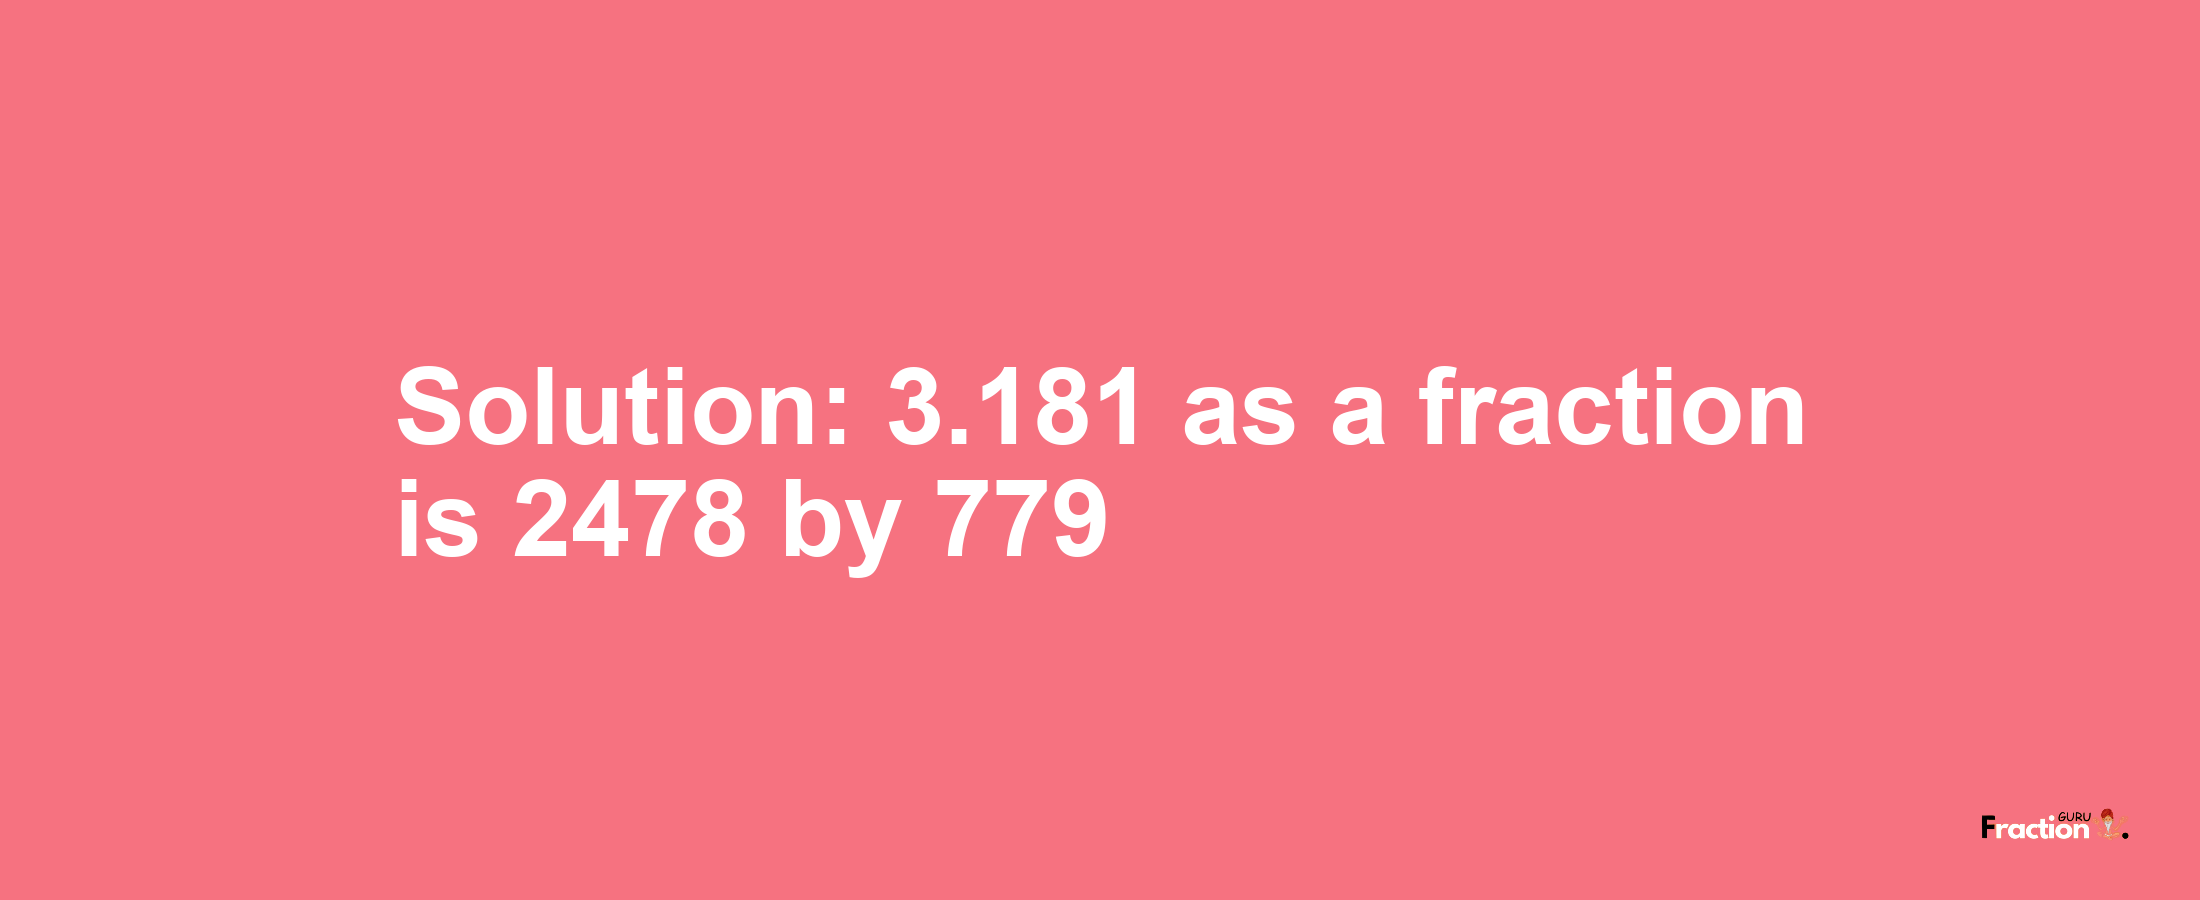 Solution:3.181 as a fraction is 2478/779